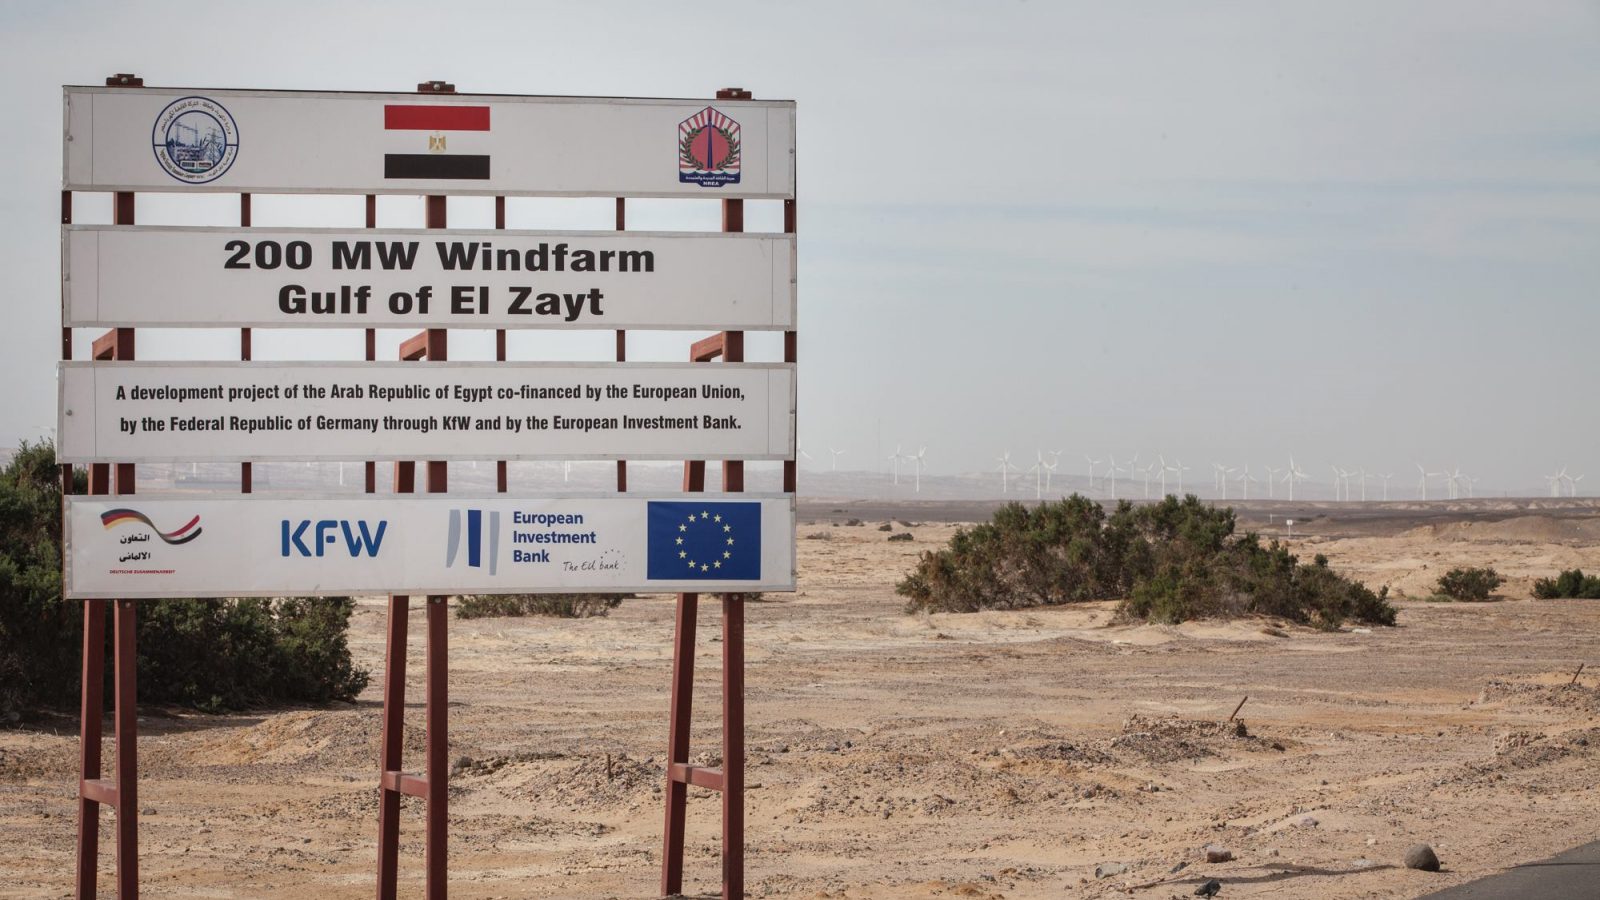 The Gabal El-Zayt windfarm in Egypt is co-financed by the EU, which has granted 30 million euros in funding